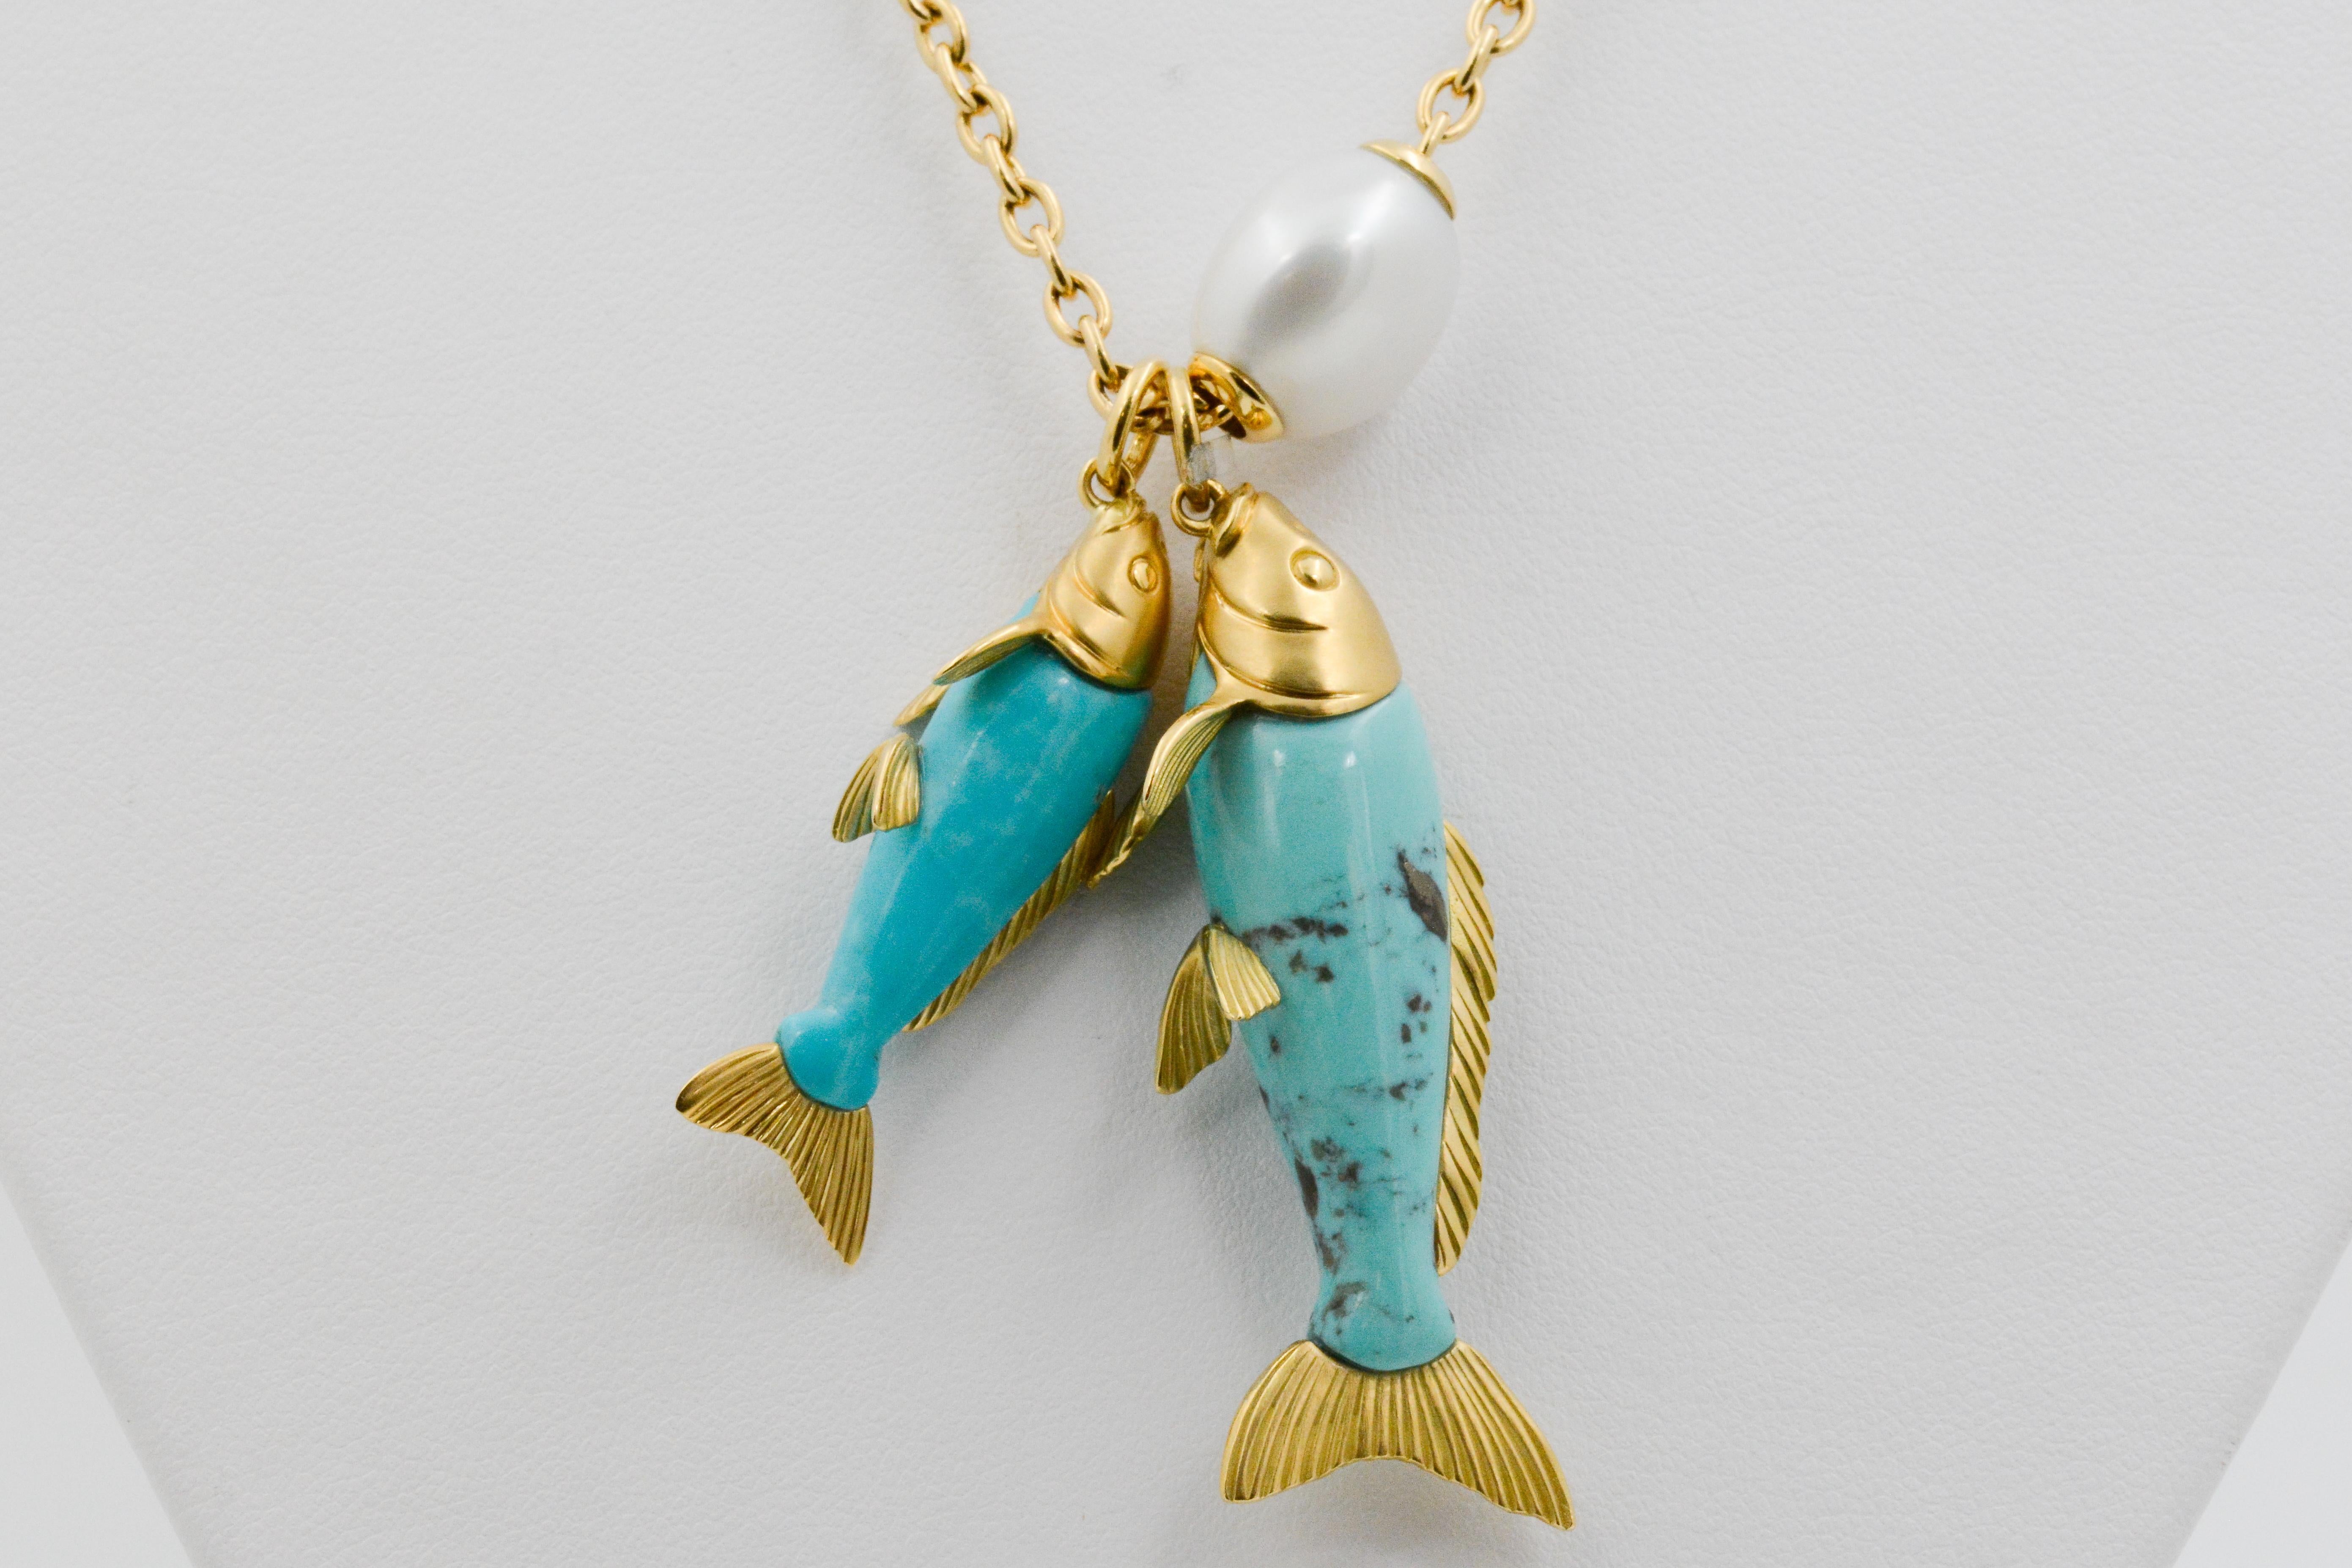 These Seaman Schepps turquoise koi fish charms are accented with 18 karat yellow gold heads and fins. They are strung on an 18 karat yellow gold 27 inch adjustable chain that features one pearl on the chain. One charm is larger than the other. Both